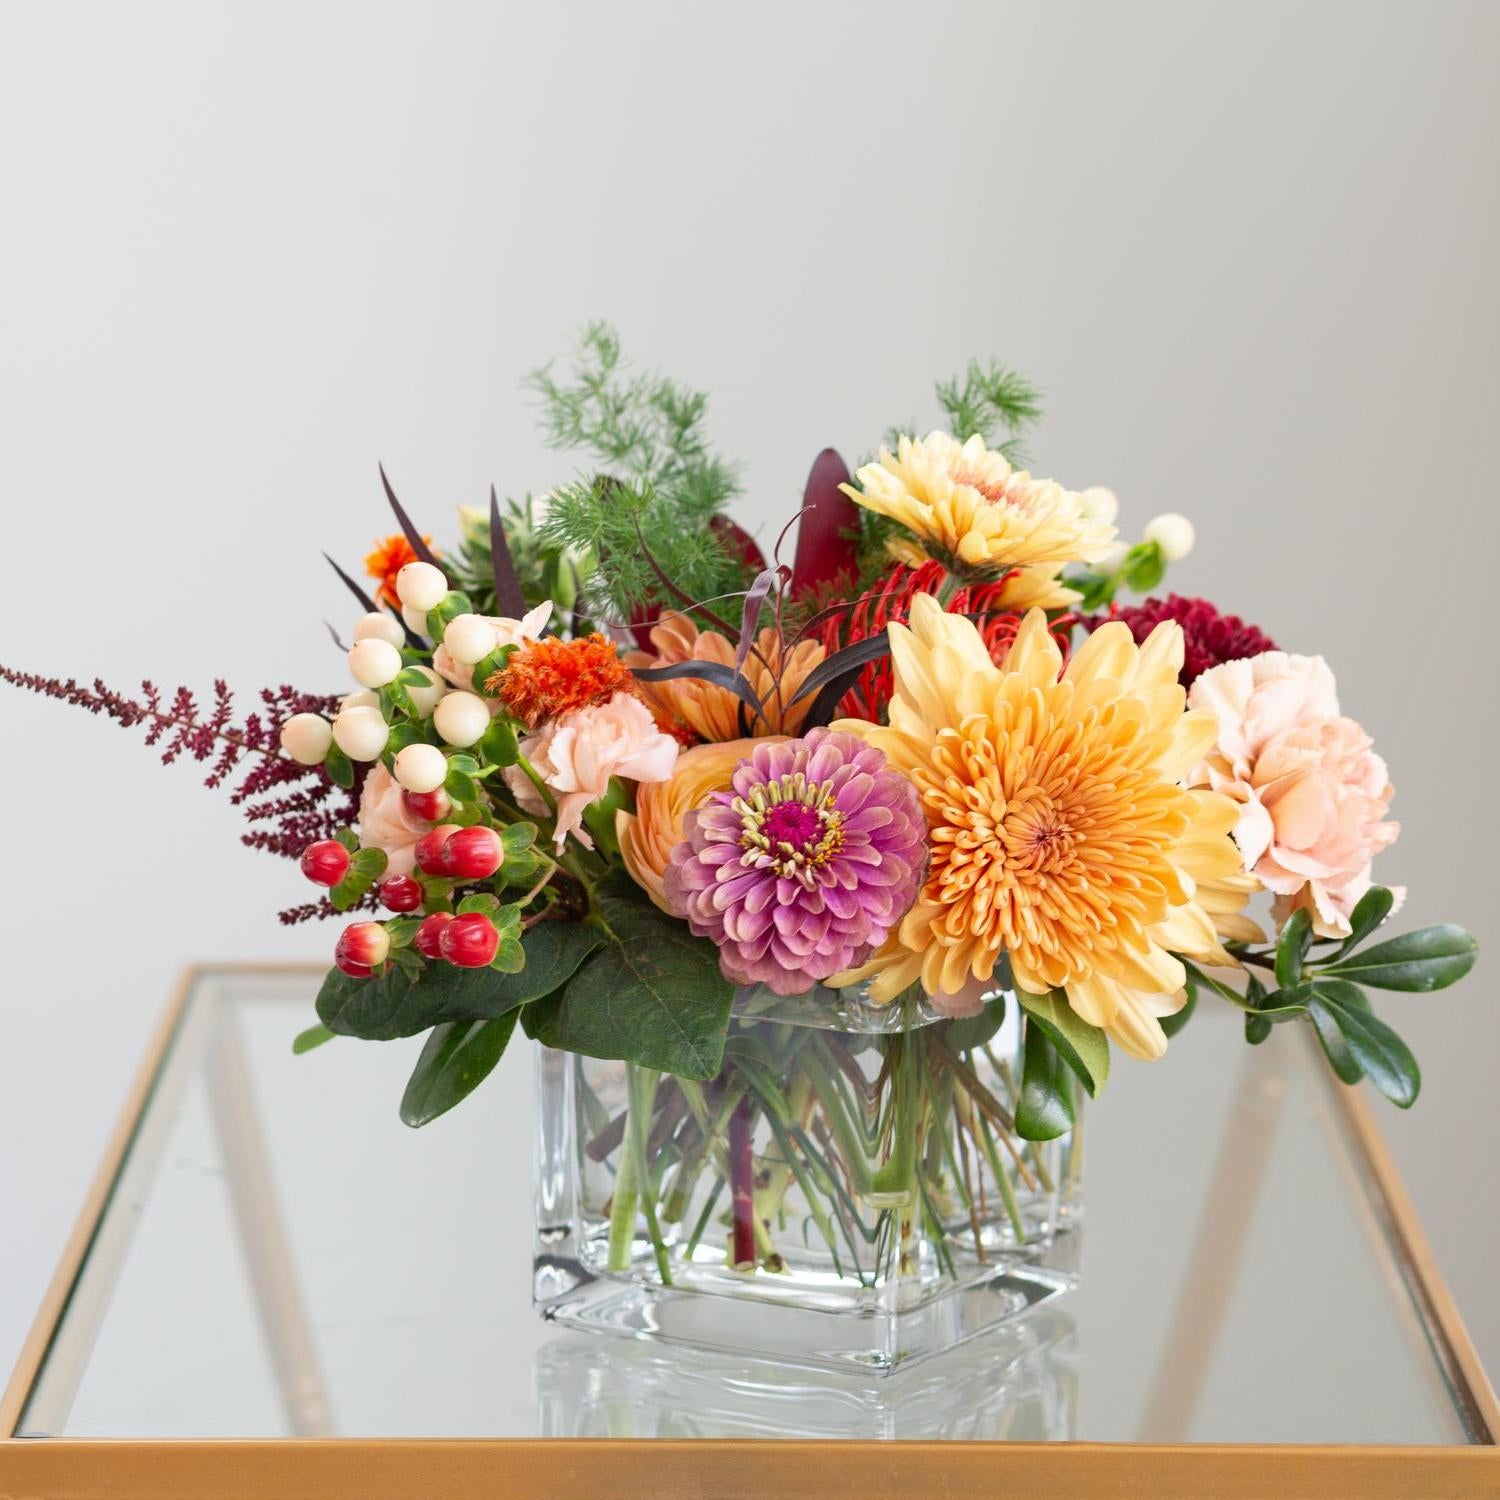 Vibrant autumnal flower arrangement in a square glass vase, featuring purple dahlias, peach carnations, orange mums, and accents of red hypericum berries, on a reflective glass tabletop with a gray wall background.